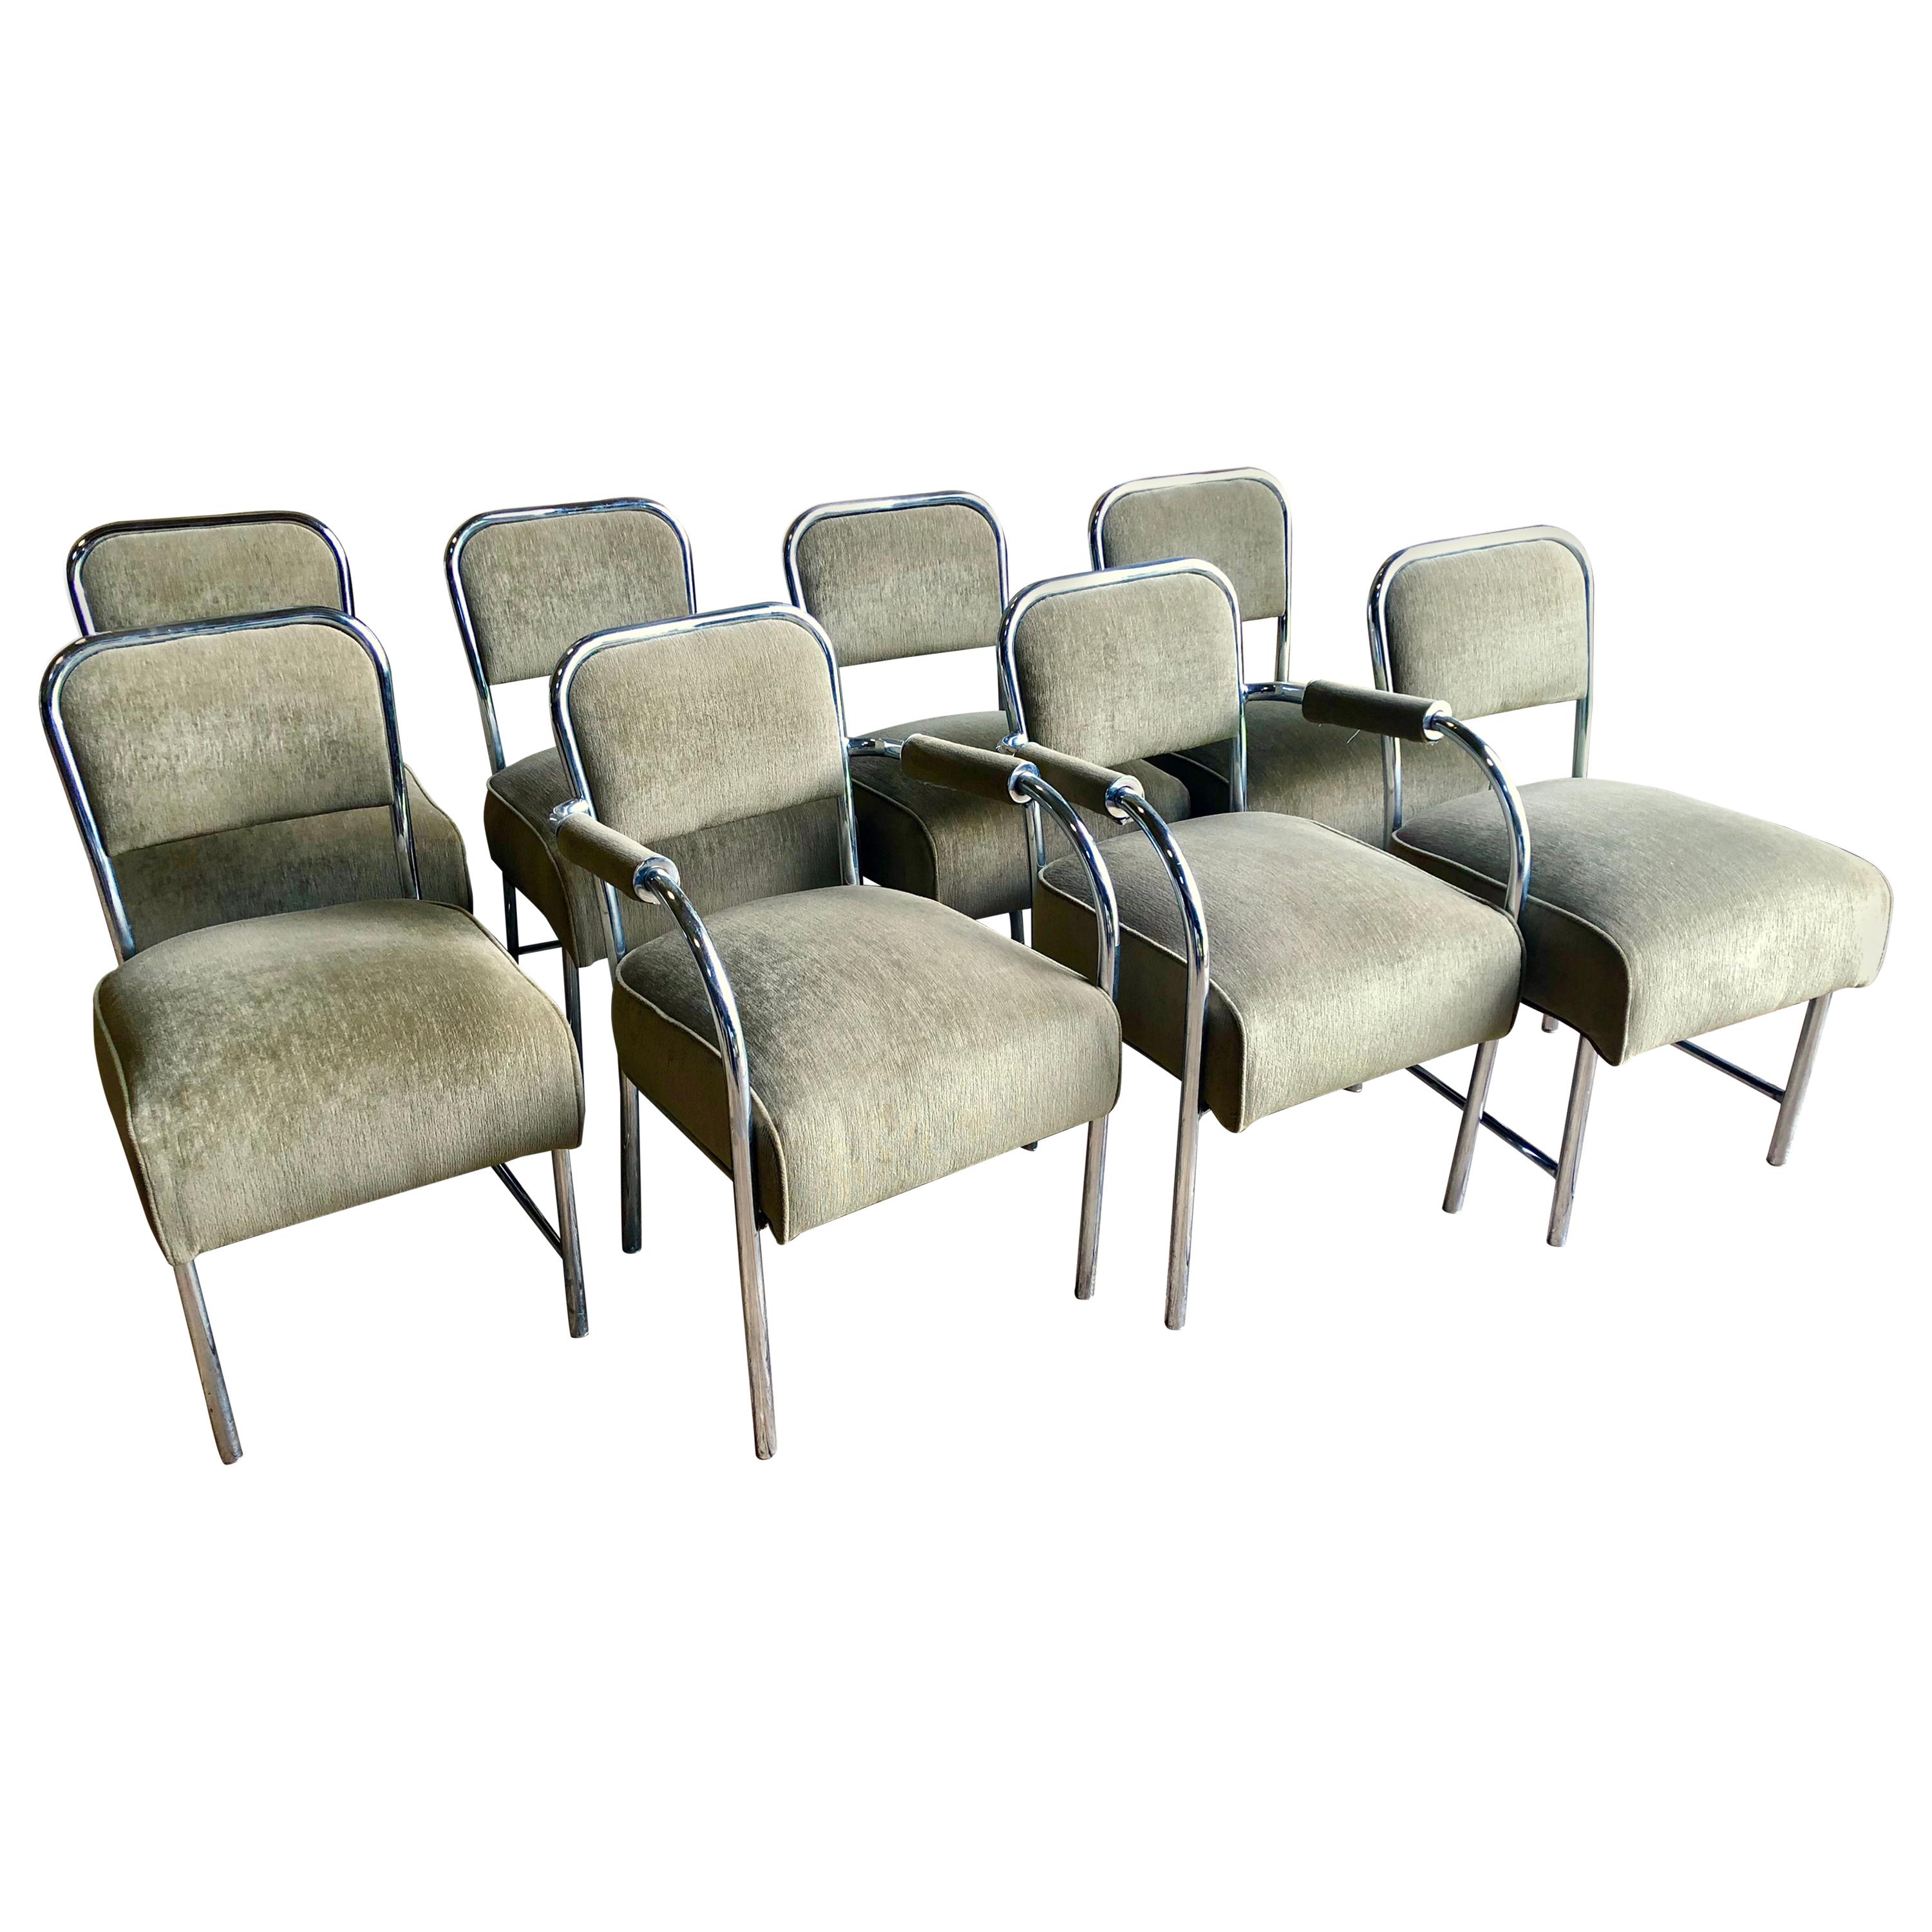 Set of 8 Art Deco Style Chrome Dining Chairs